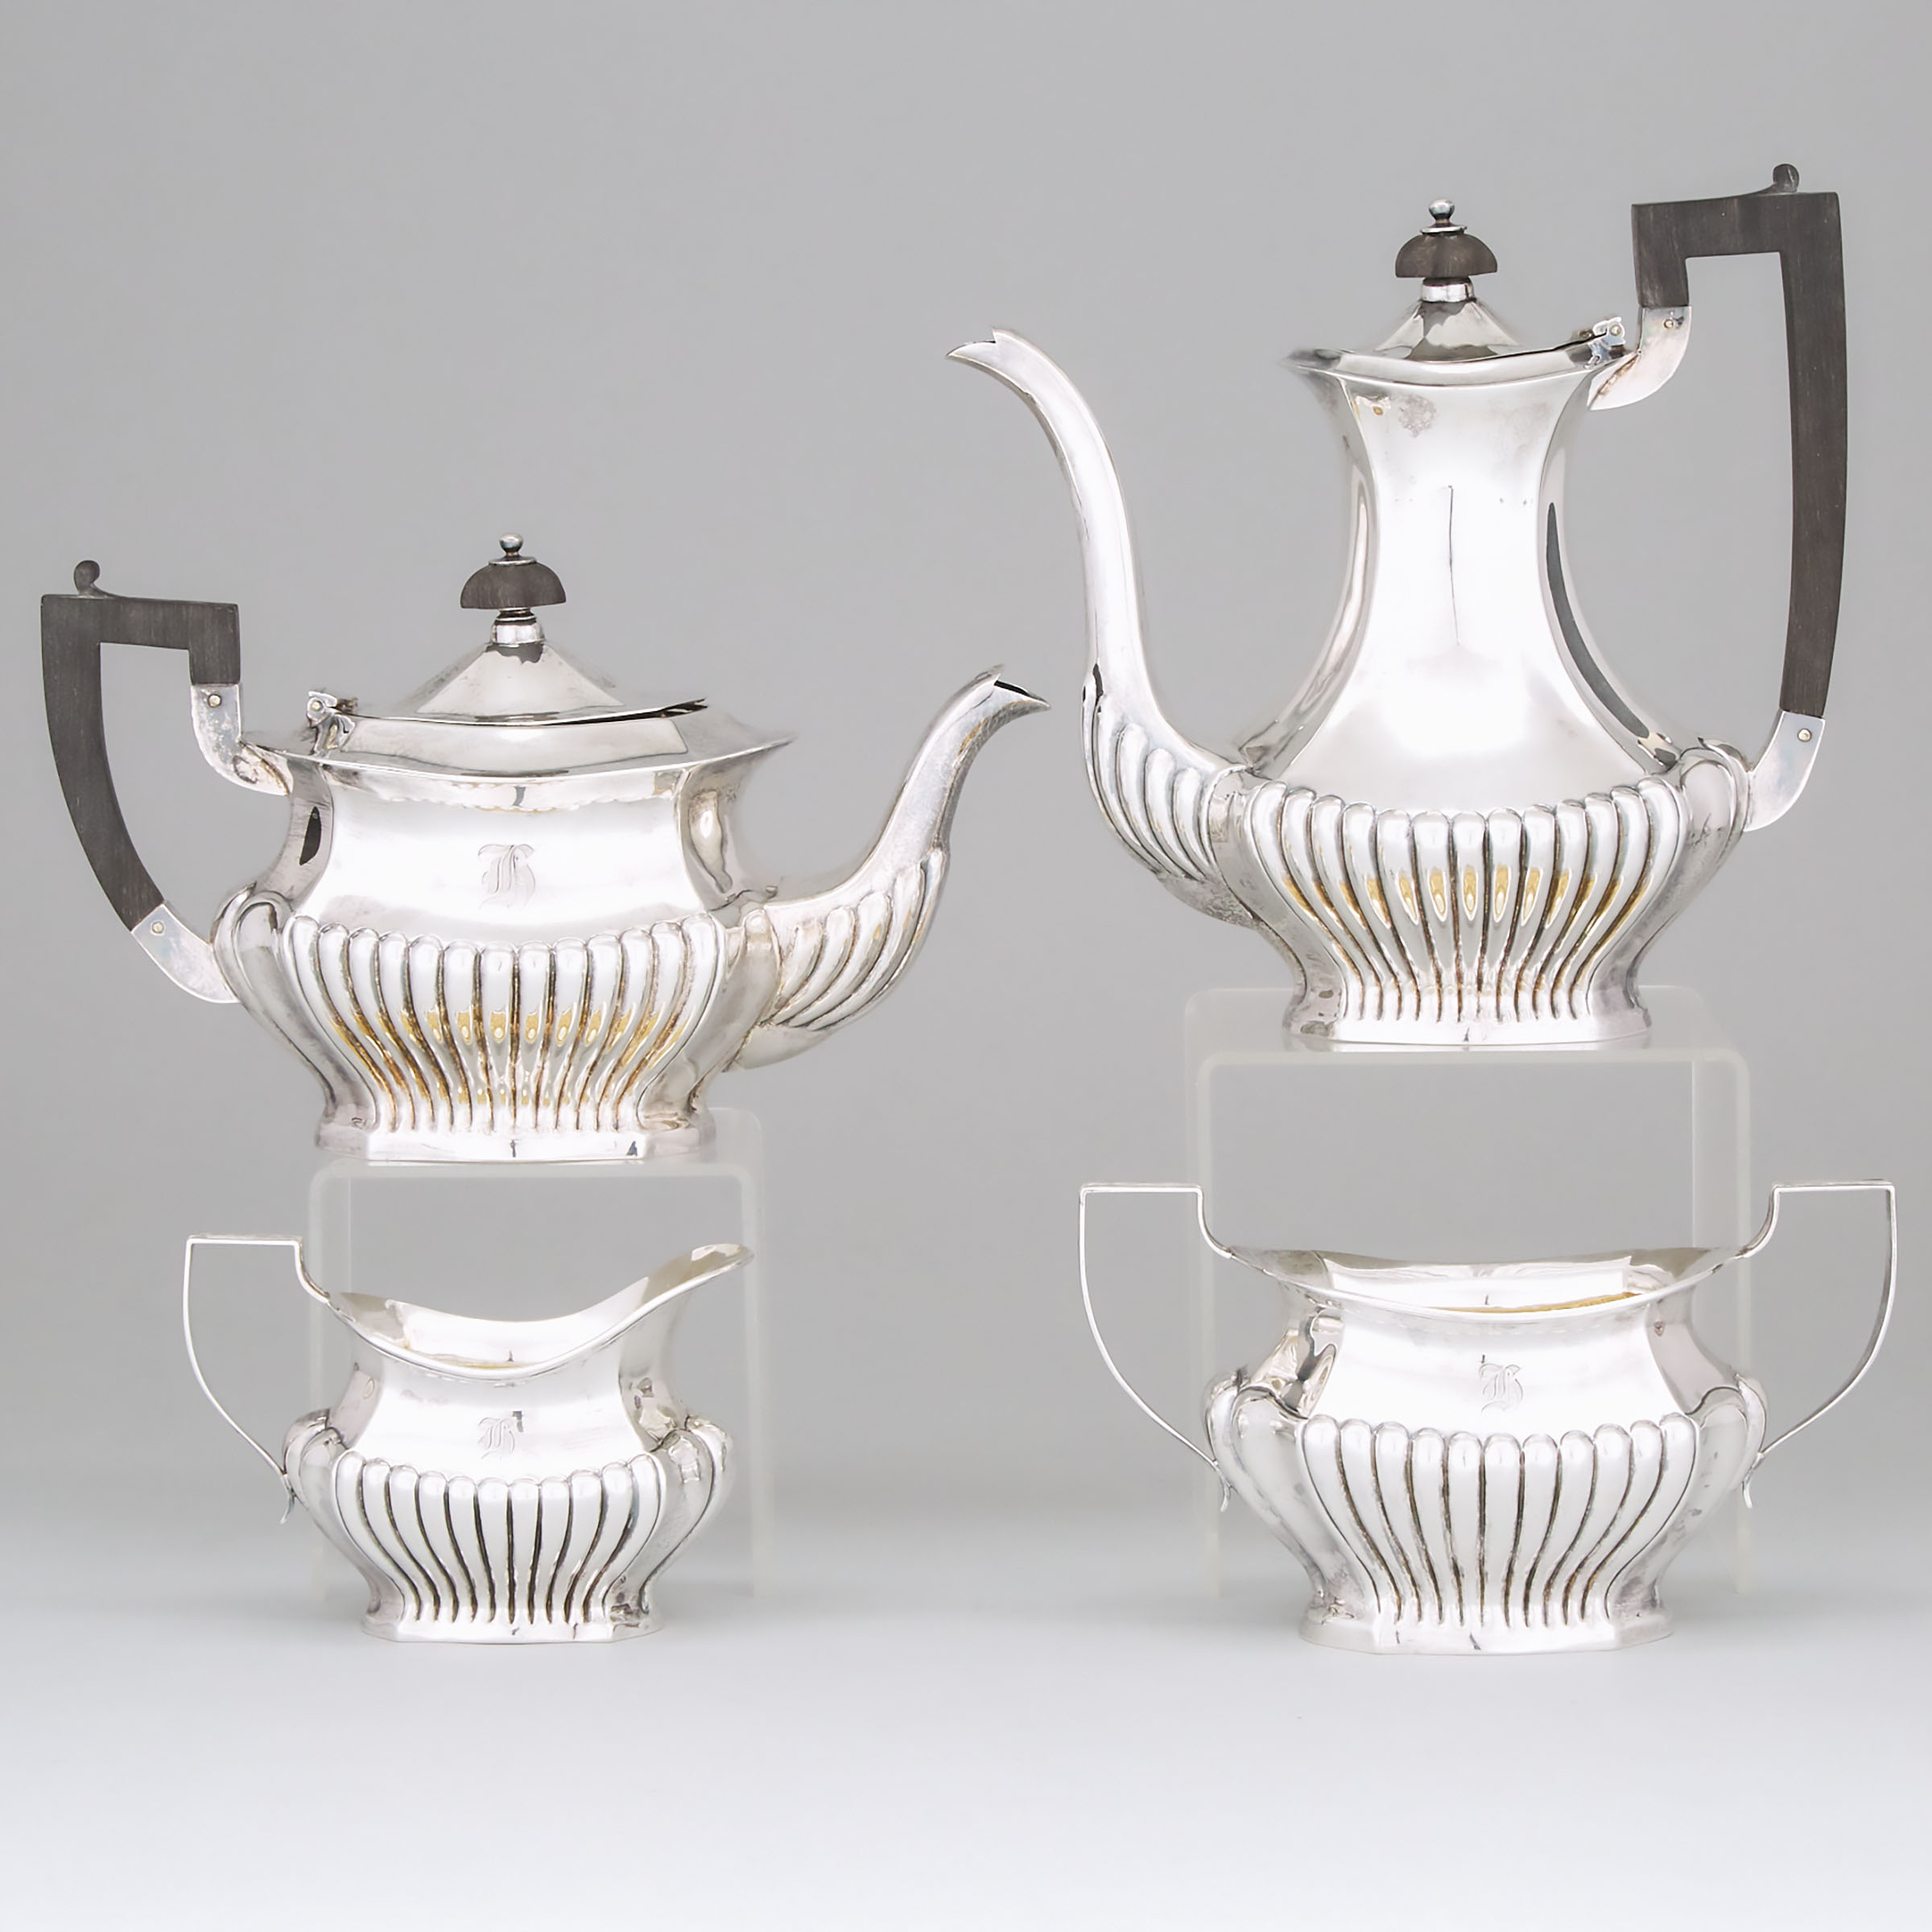 Canadian Silver Tea and Coffee Service, probably Toronto Silver Plate Co., Toronto, Ont., early 20th century